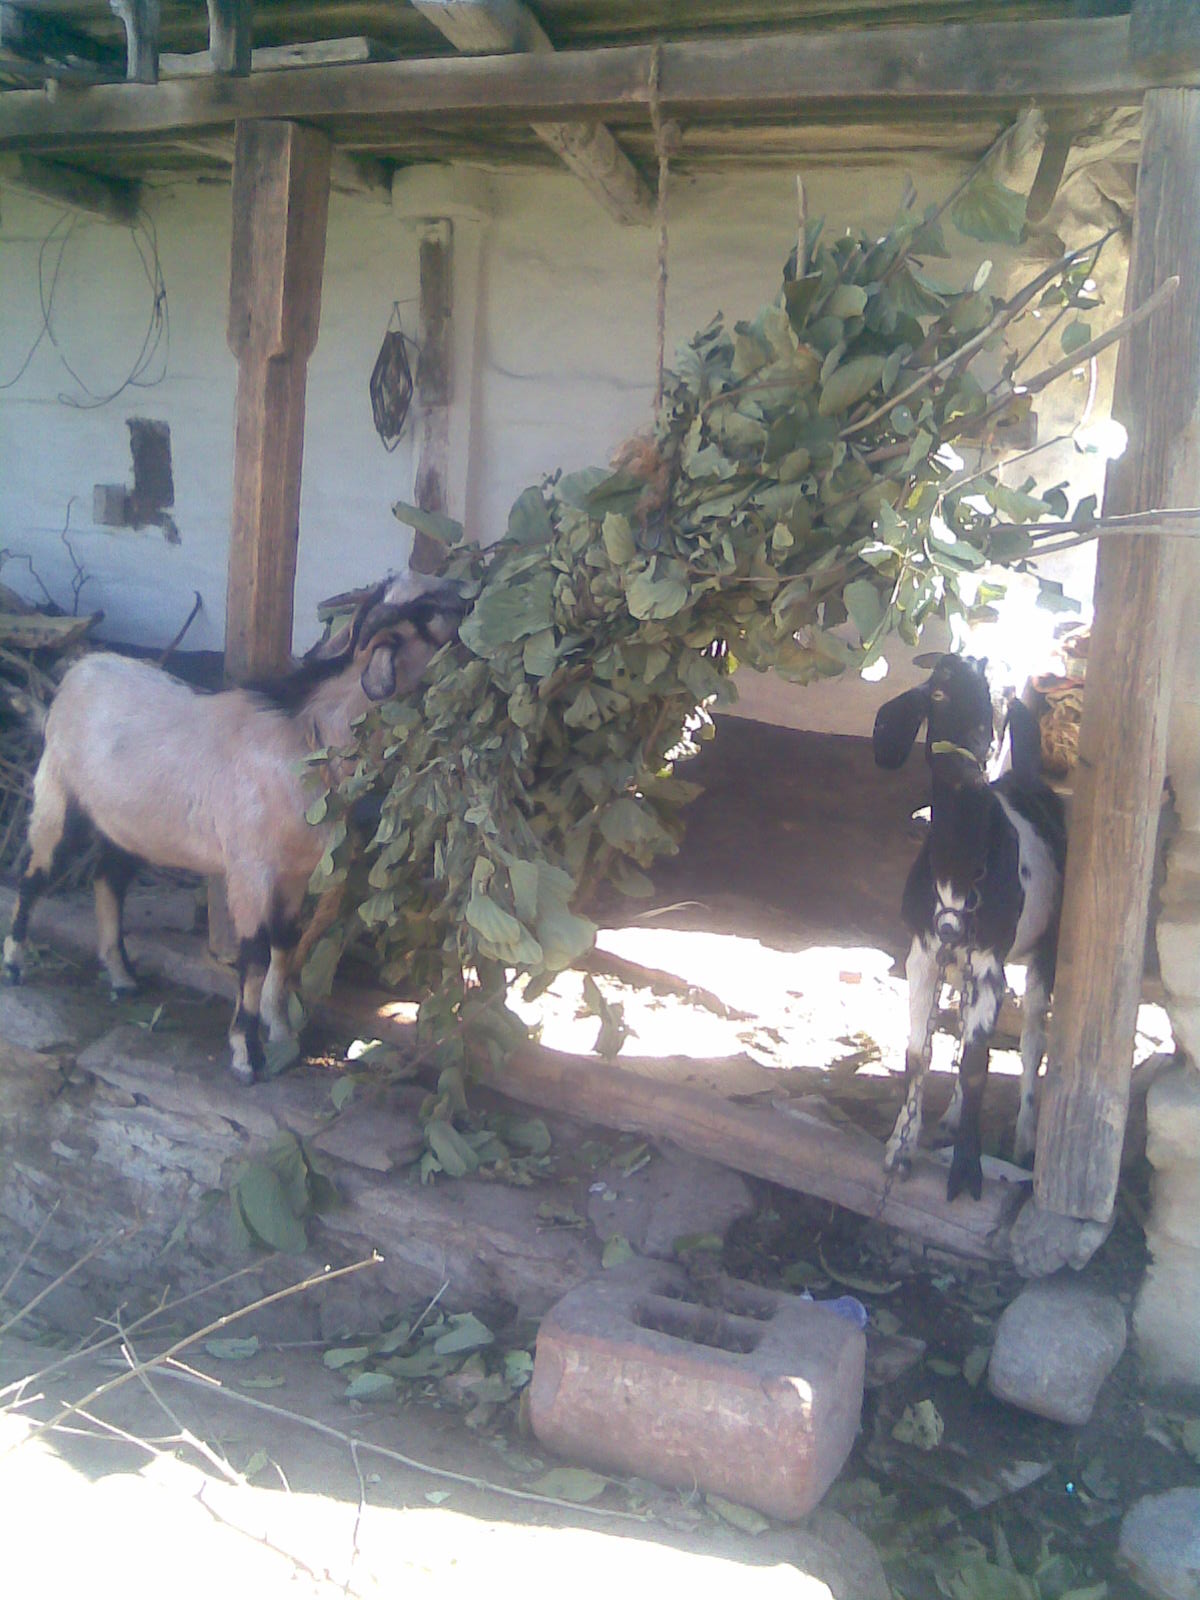 [He+goats+feeding+on+Beenda+fodder+hanged+with+a+rope+called+Uchhmeou.+Also+seen+in+front+stone+made+Tolind-weight+lifting+instrument.jpg]